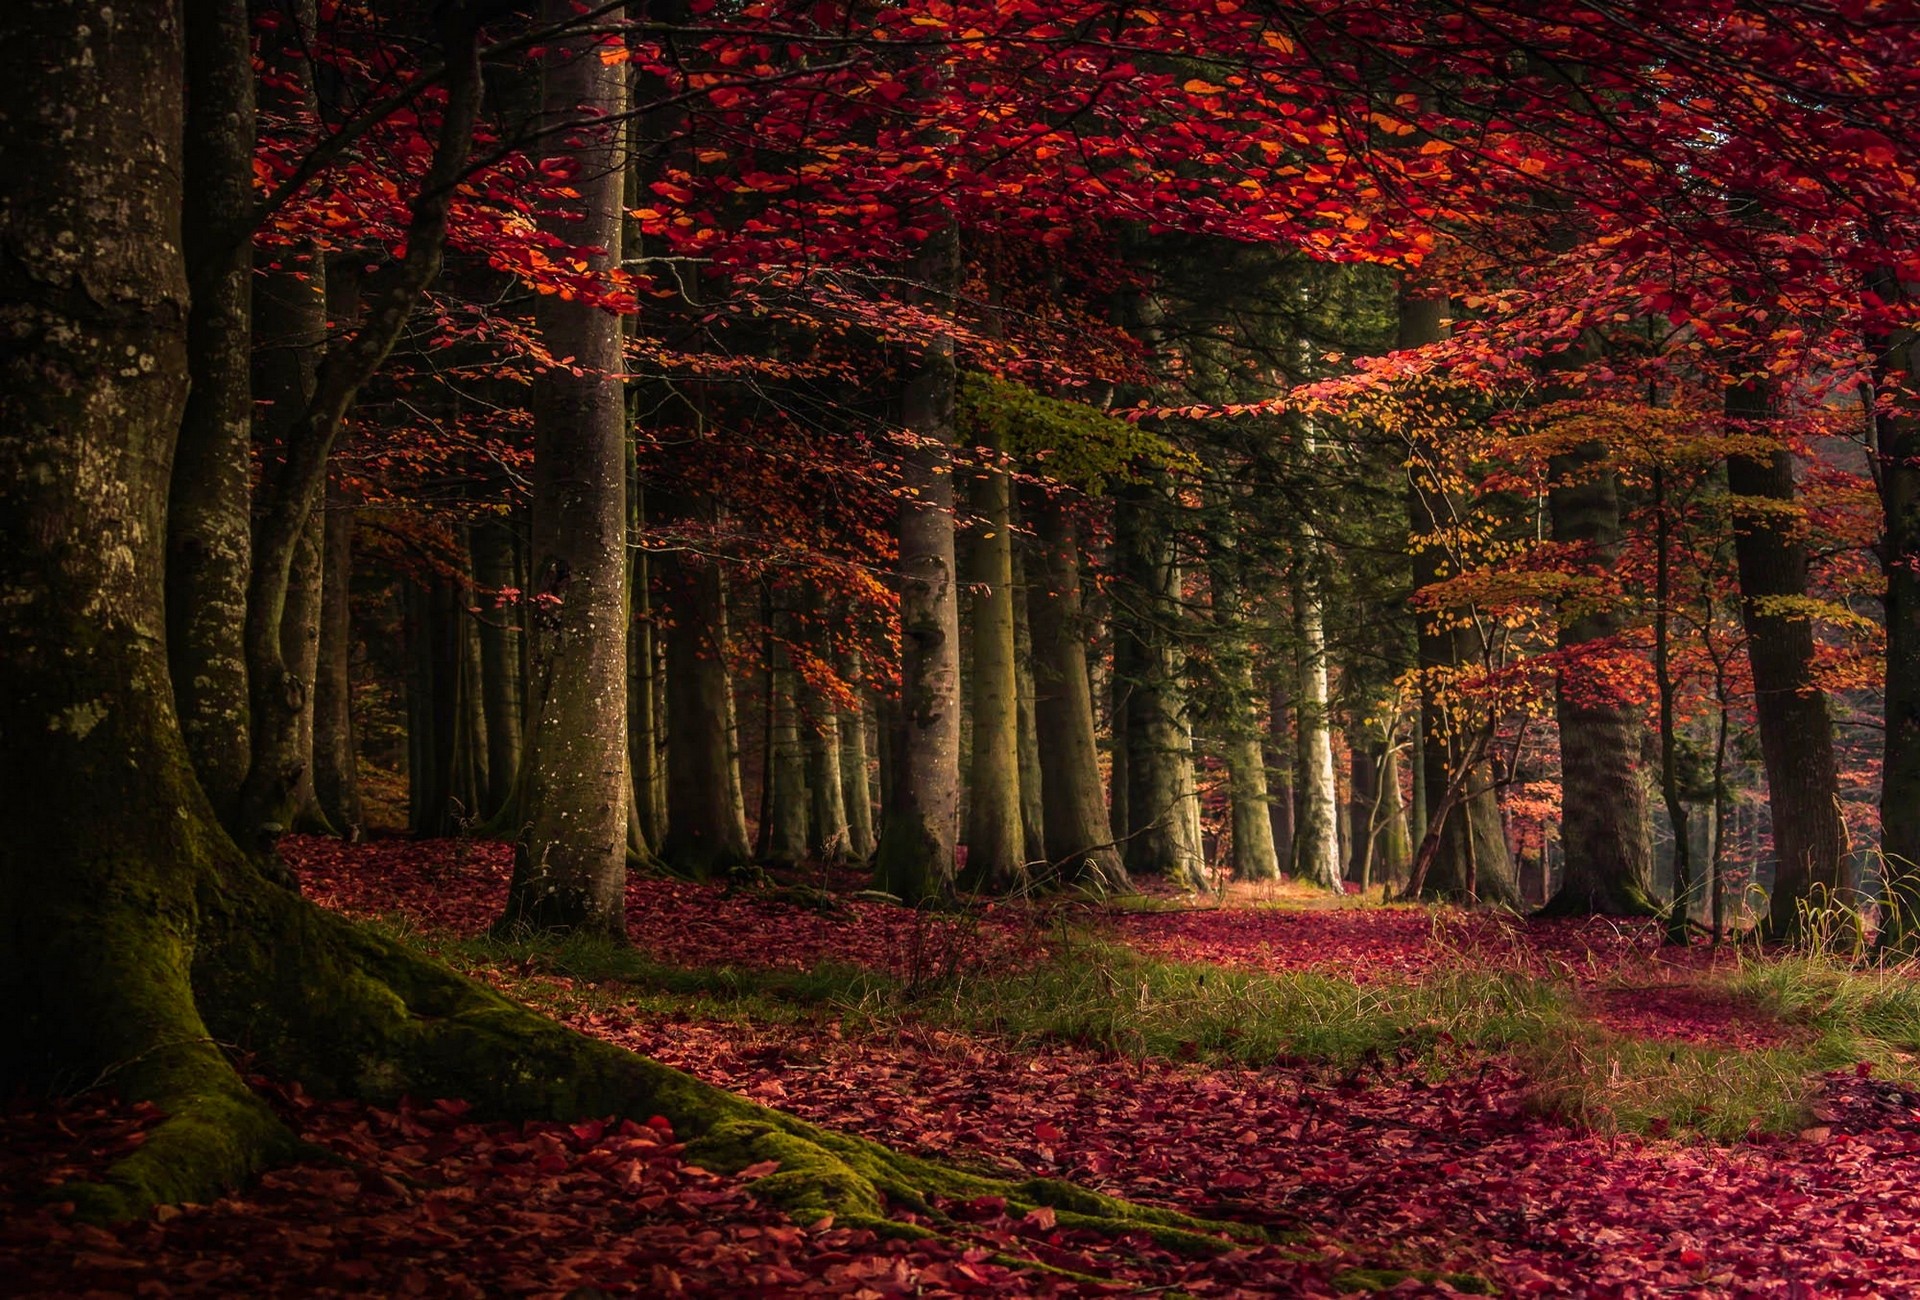 General 1920x1300 nature forest fall leaves trees roots grass red moss fallen leaves outdoors